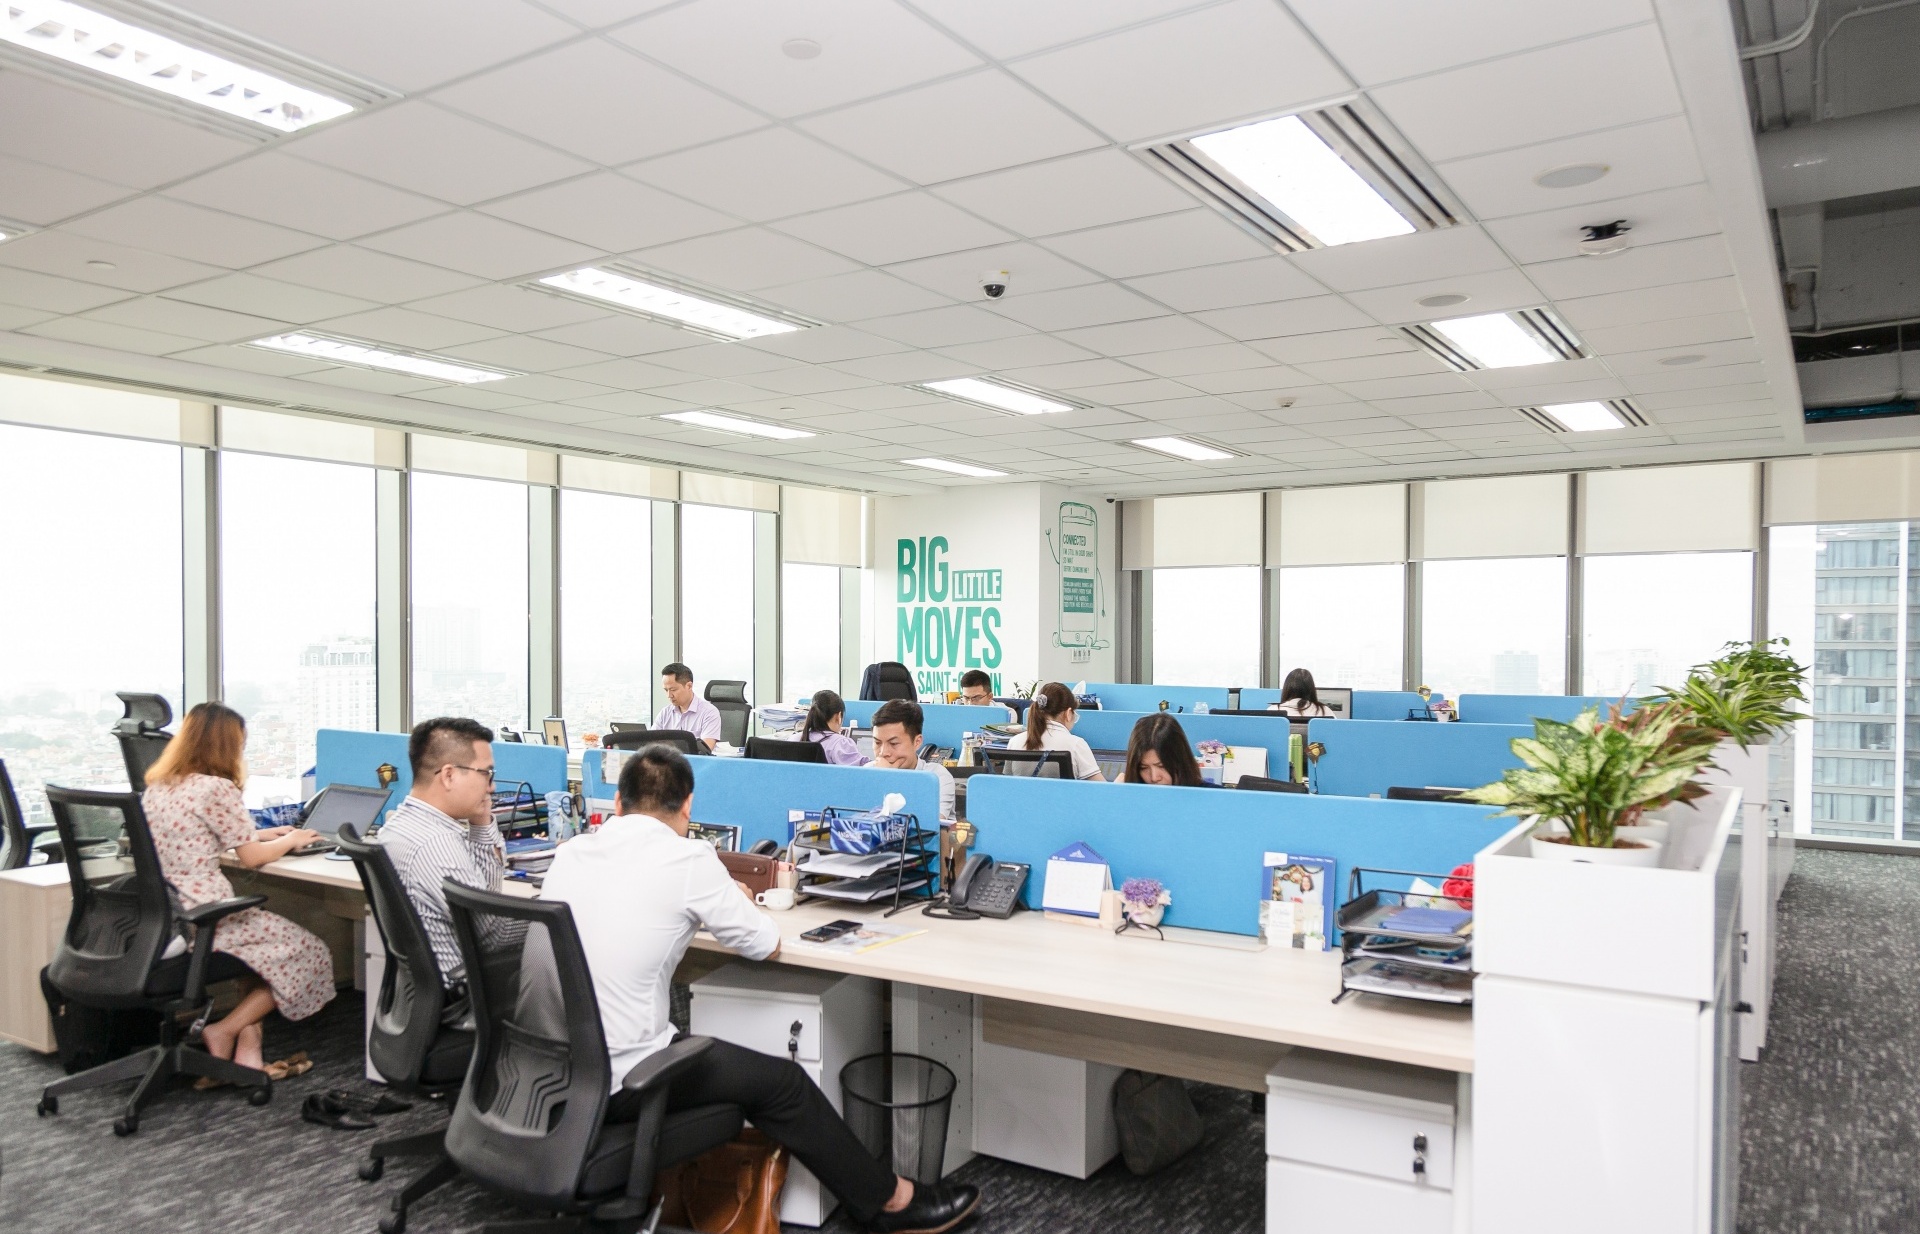 Saint-Gobain Vietnam’s office confirms coveted Green Construction LOTUS Gold